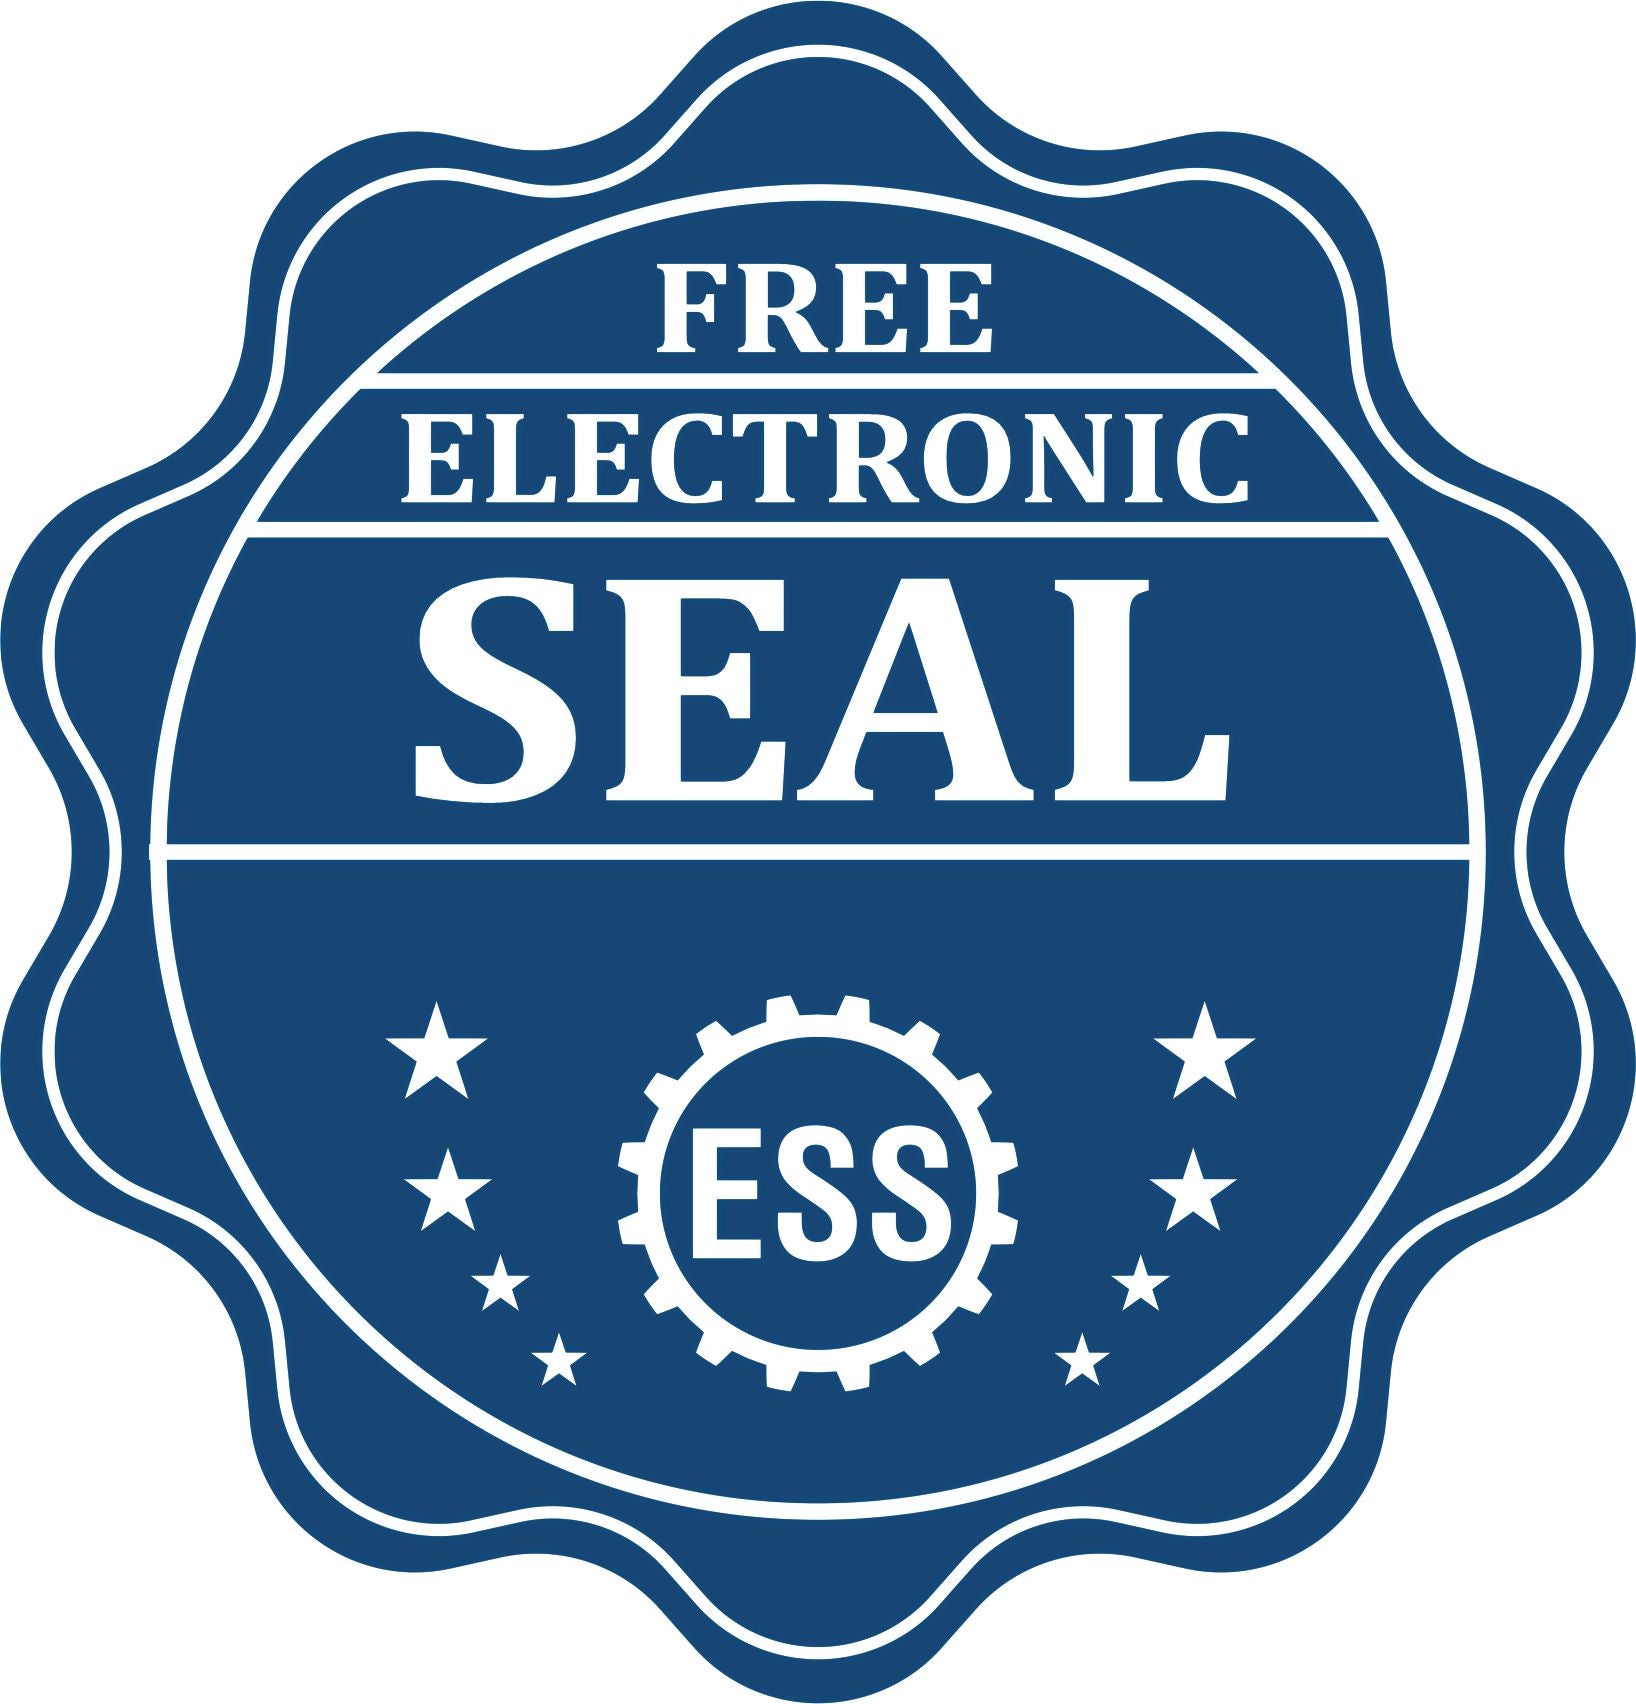 A badge showing a free electronic seal for the Heavy Duty Cast Iron Mississippi Architect Embosser with stars and the ESS gear on the emblem.